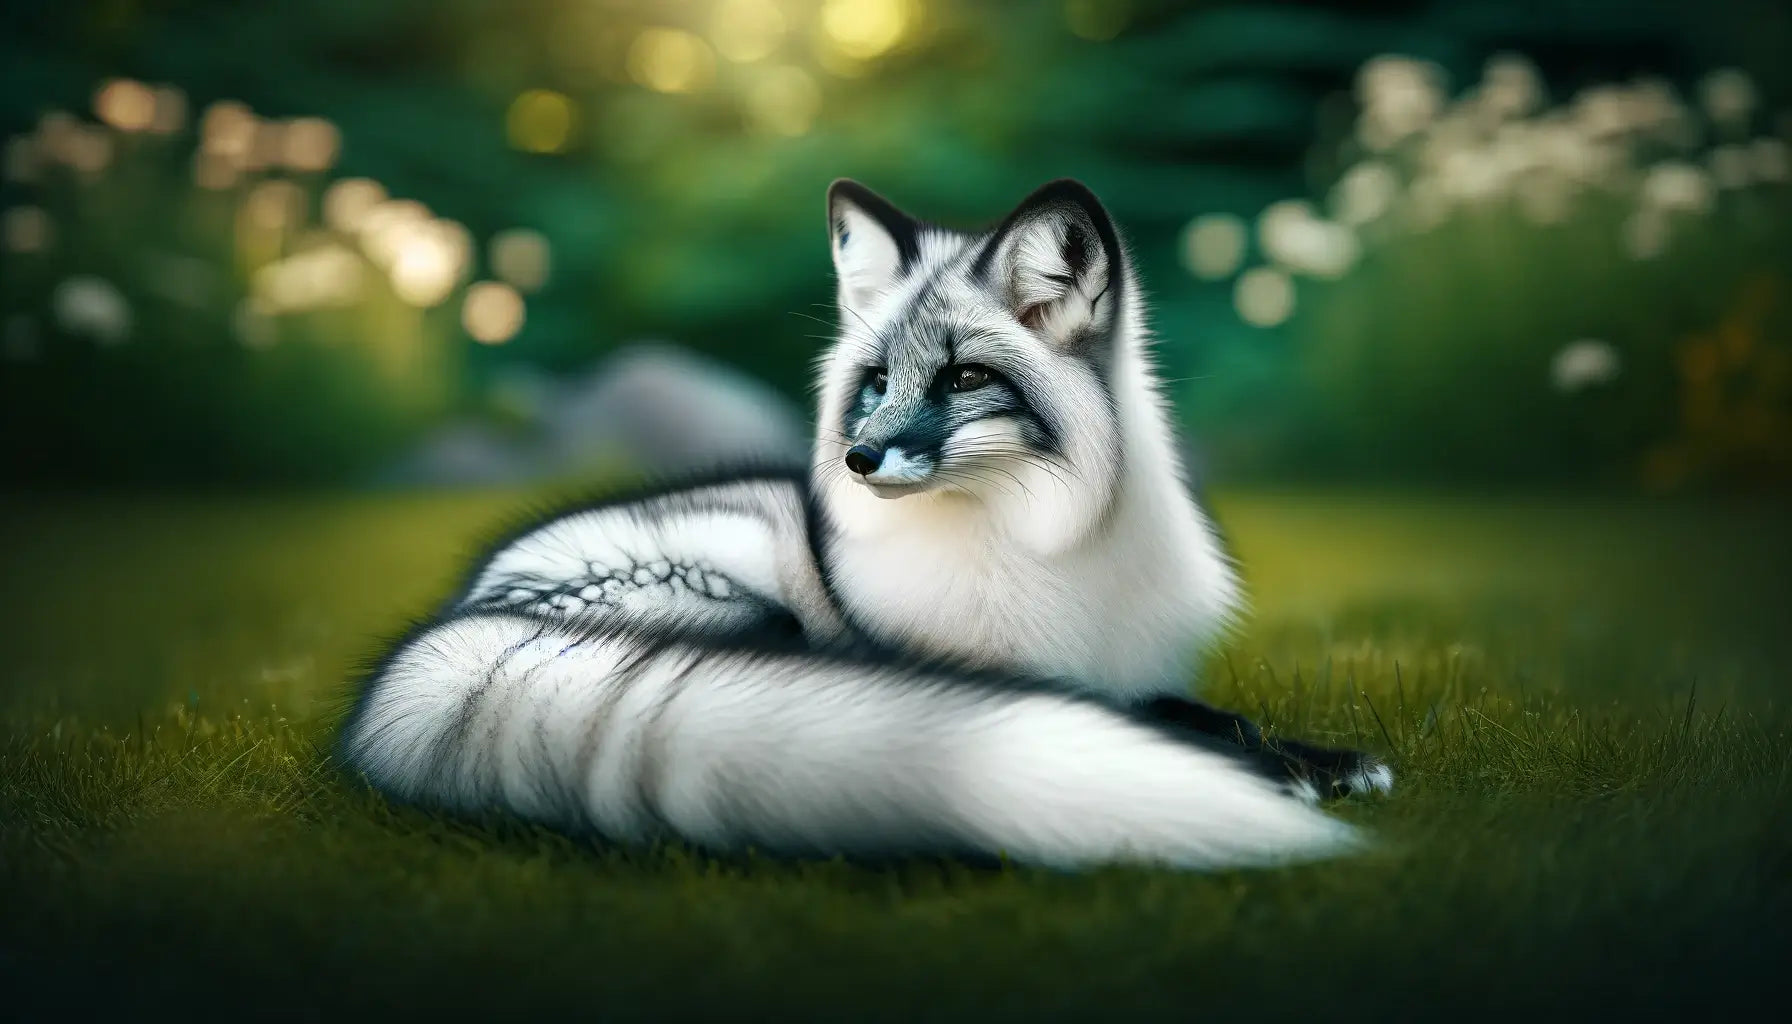 A Canadian Marble Fox lying on grass, its coat predominantly white with striking black markings that run down its back and tail.